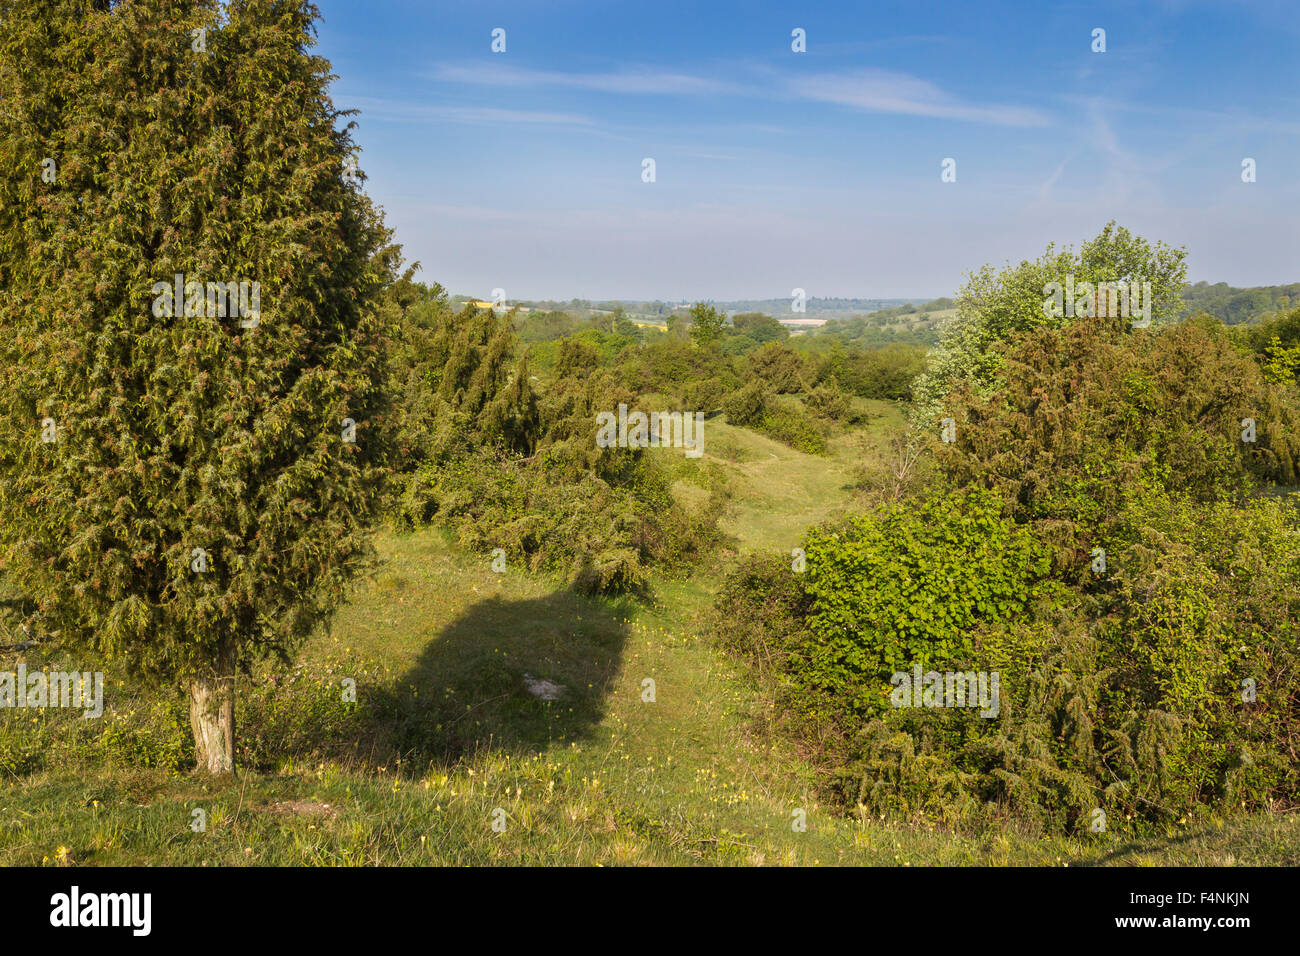 Landscape view of Noar Hill nature reserve and undulating quarrying, Noar HIll, Hampshire, UK in May 2011. Stock Photo